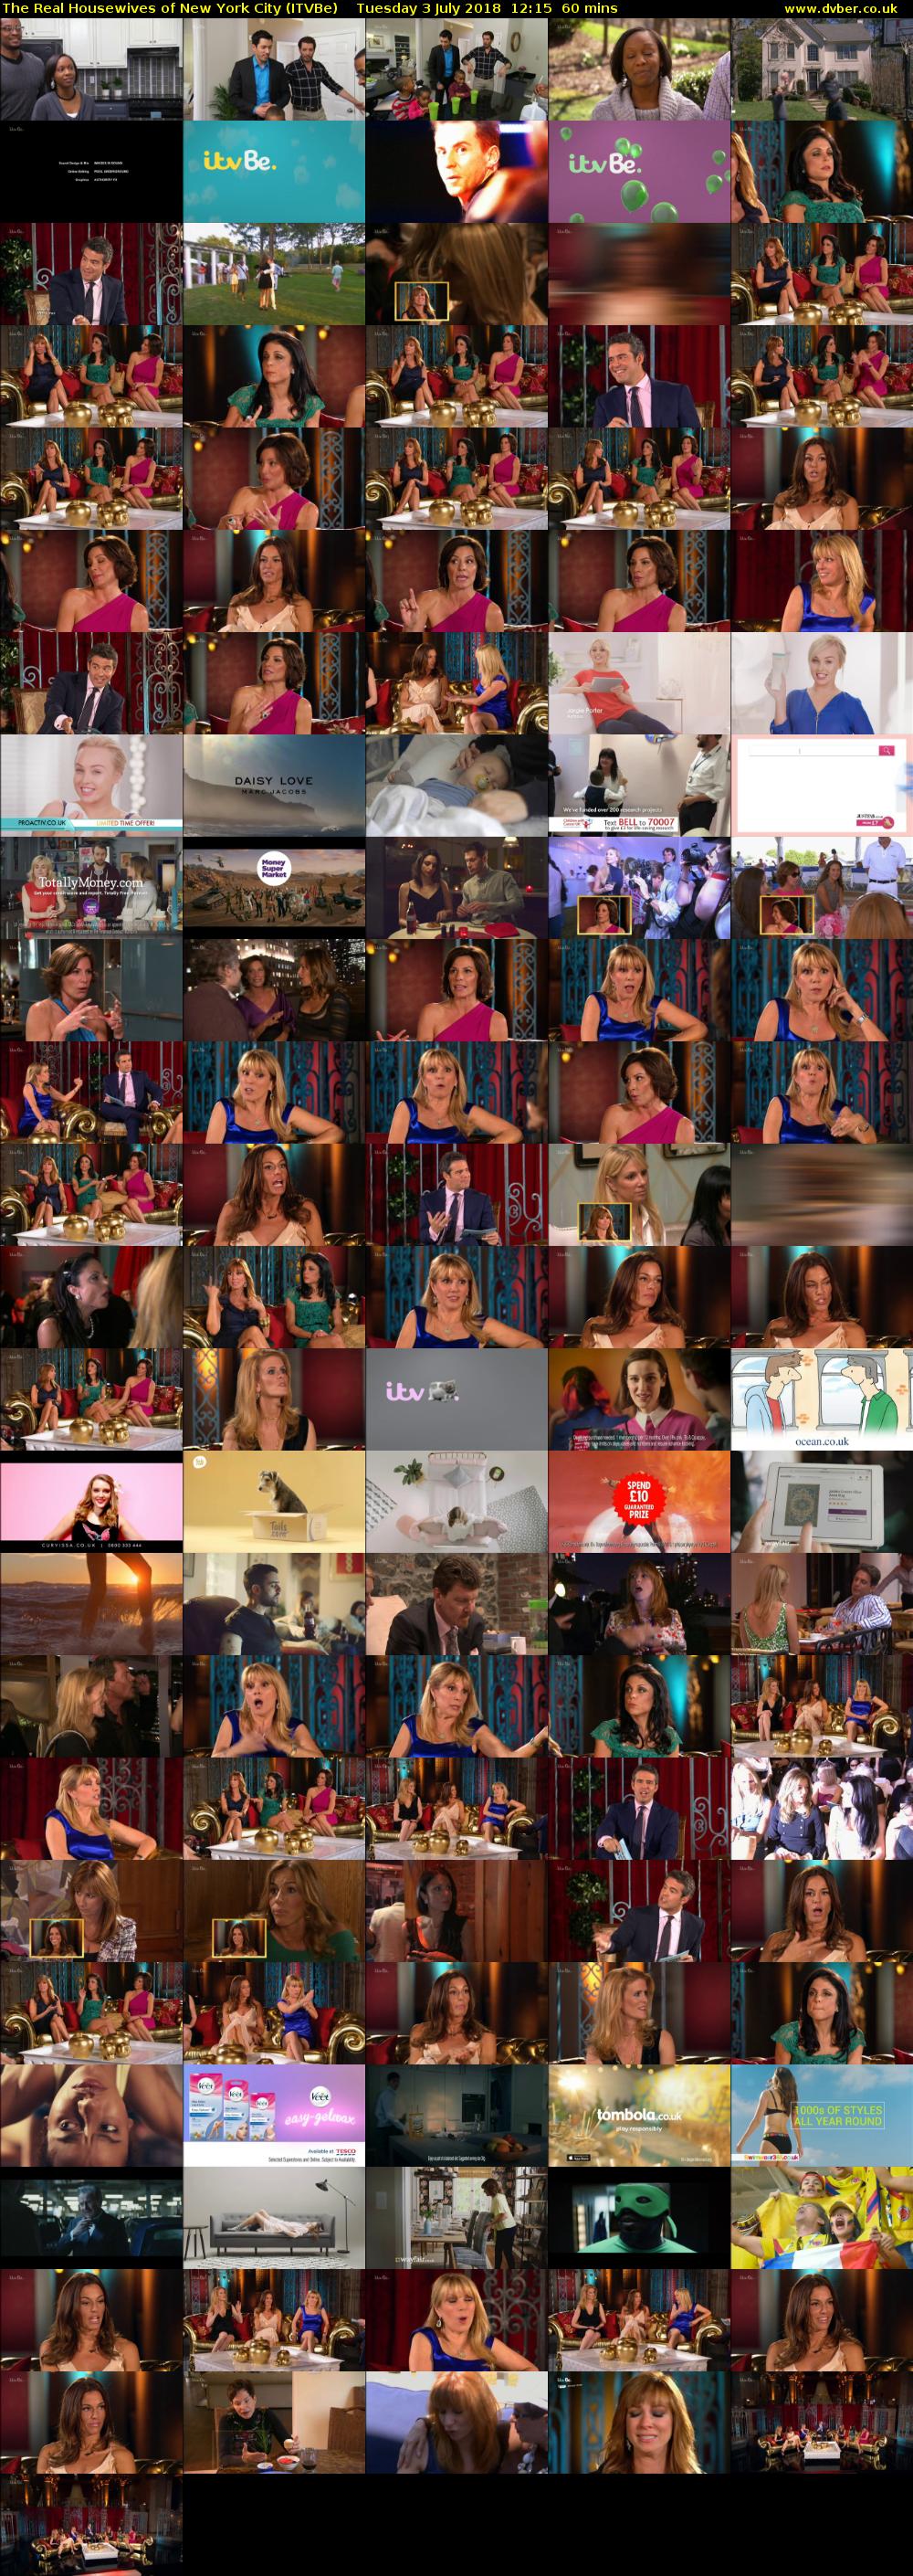 The Real Housewives of New York City (ITVBe) Tuesday 3 July 2018 12:15 - 13:15